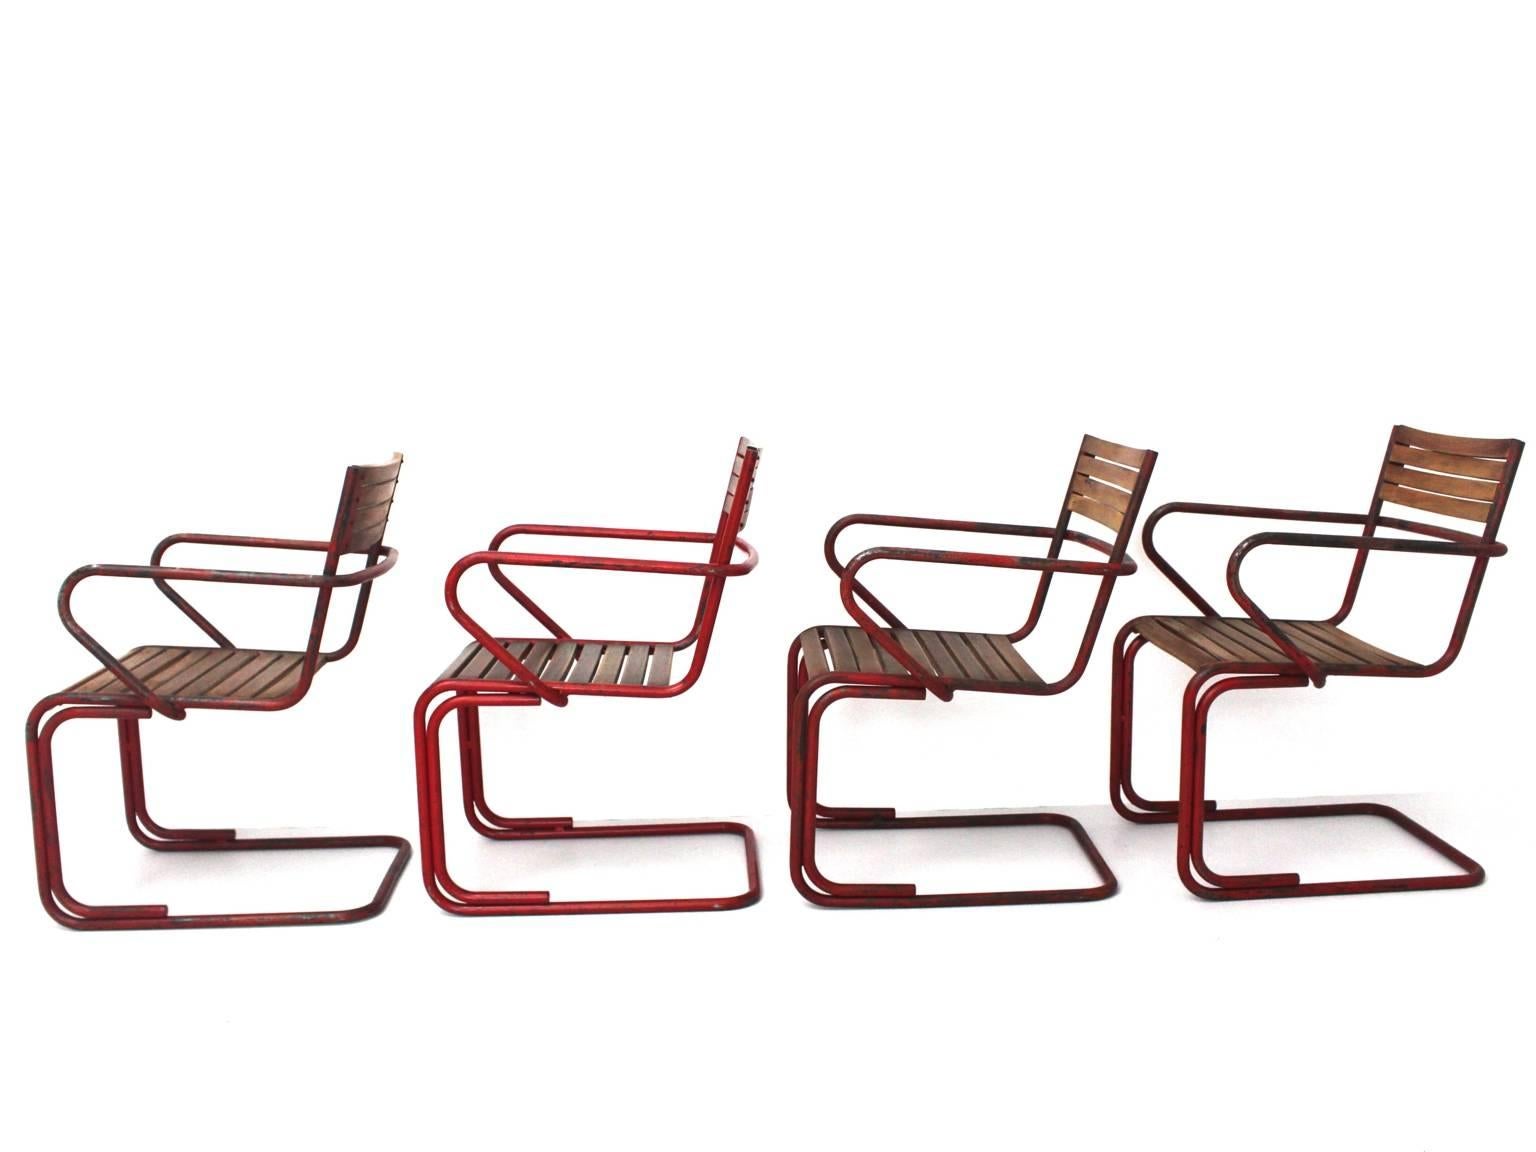 Mid century modern vintage set of five garden chairs for indoor and outdoor designed attributed to the famed architects Max Fellerer and Eugen Wörle circa 1948, Austria.

Four red colored and one green colored tabular steel chairs with original